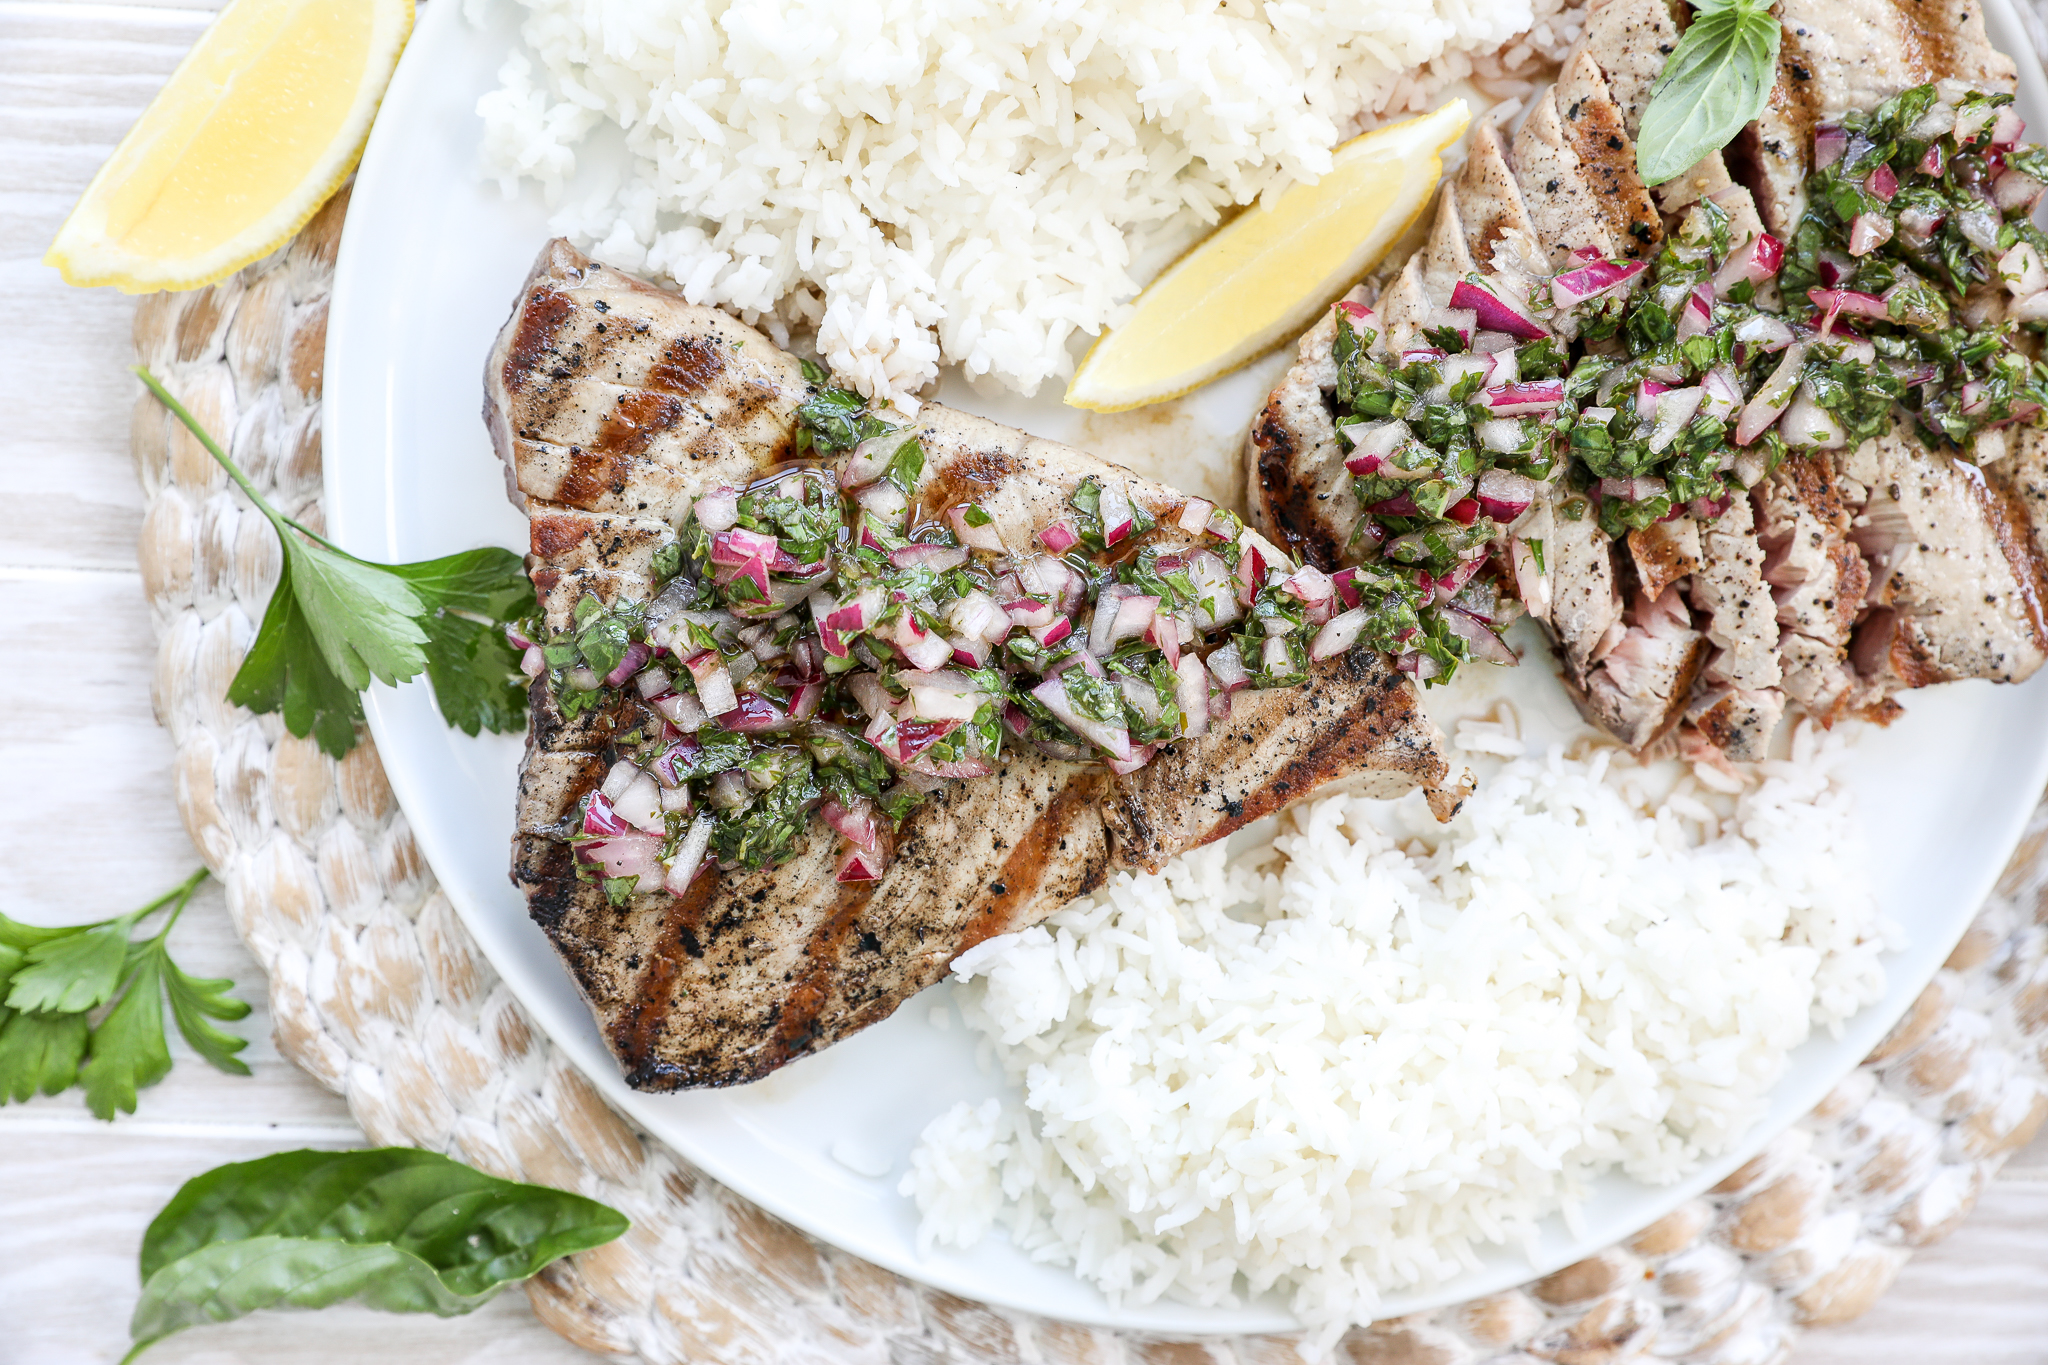 An image of grilled tuna with chimichurri sauce